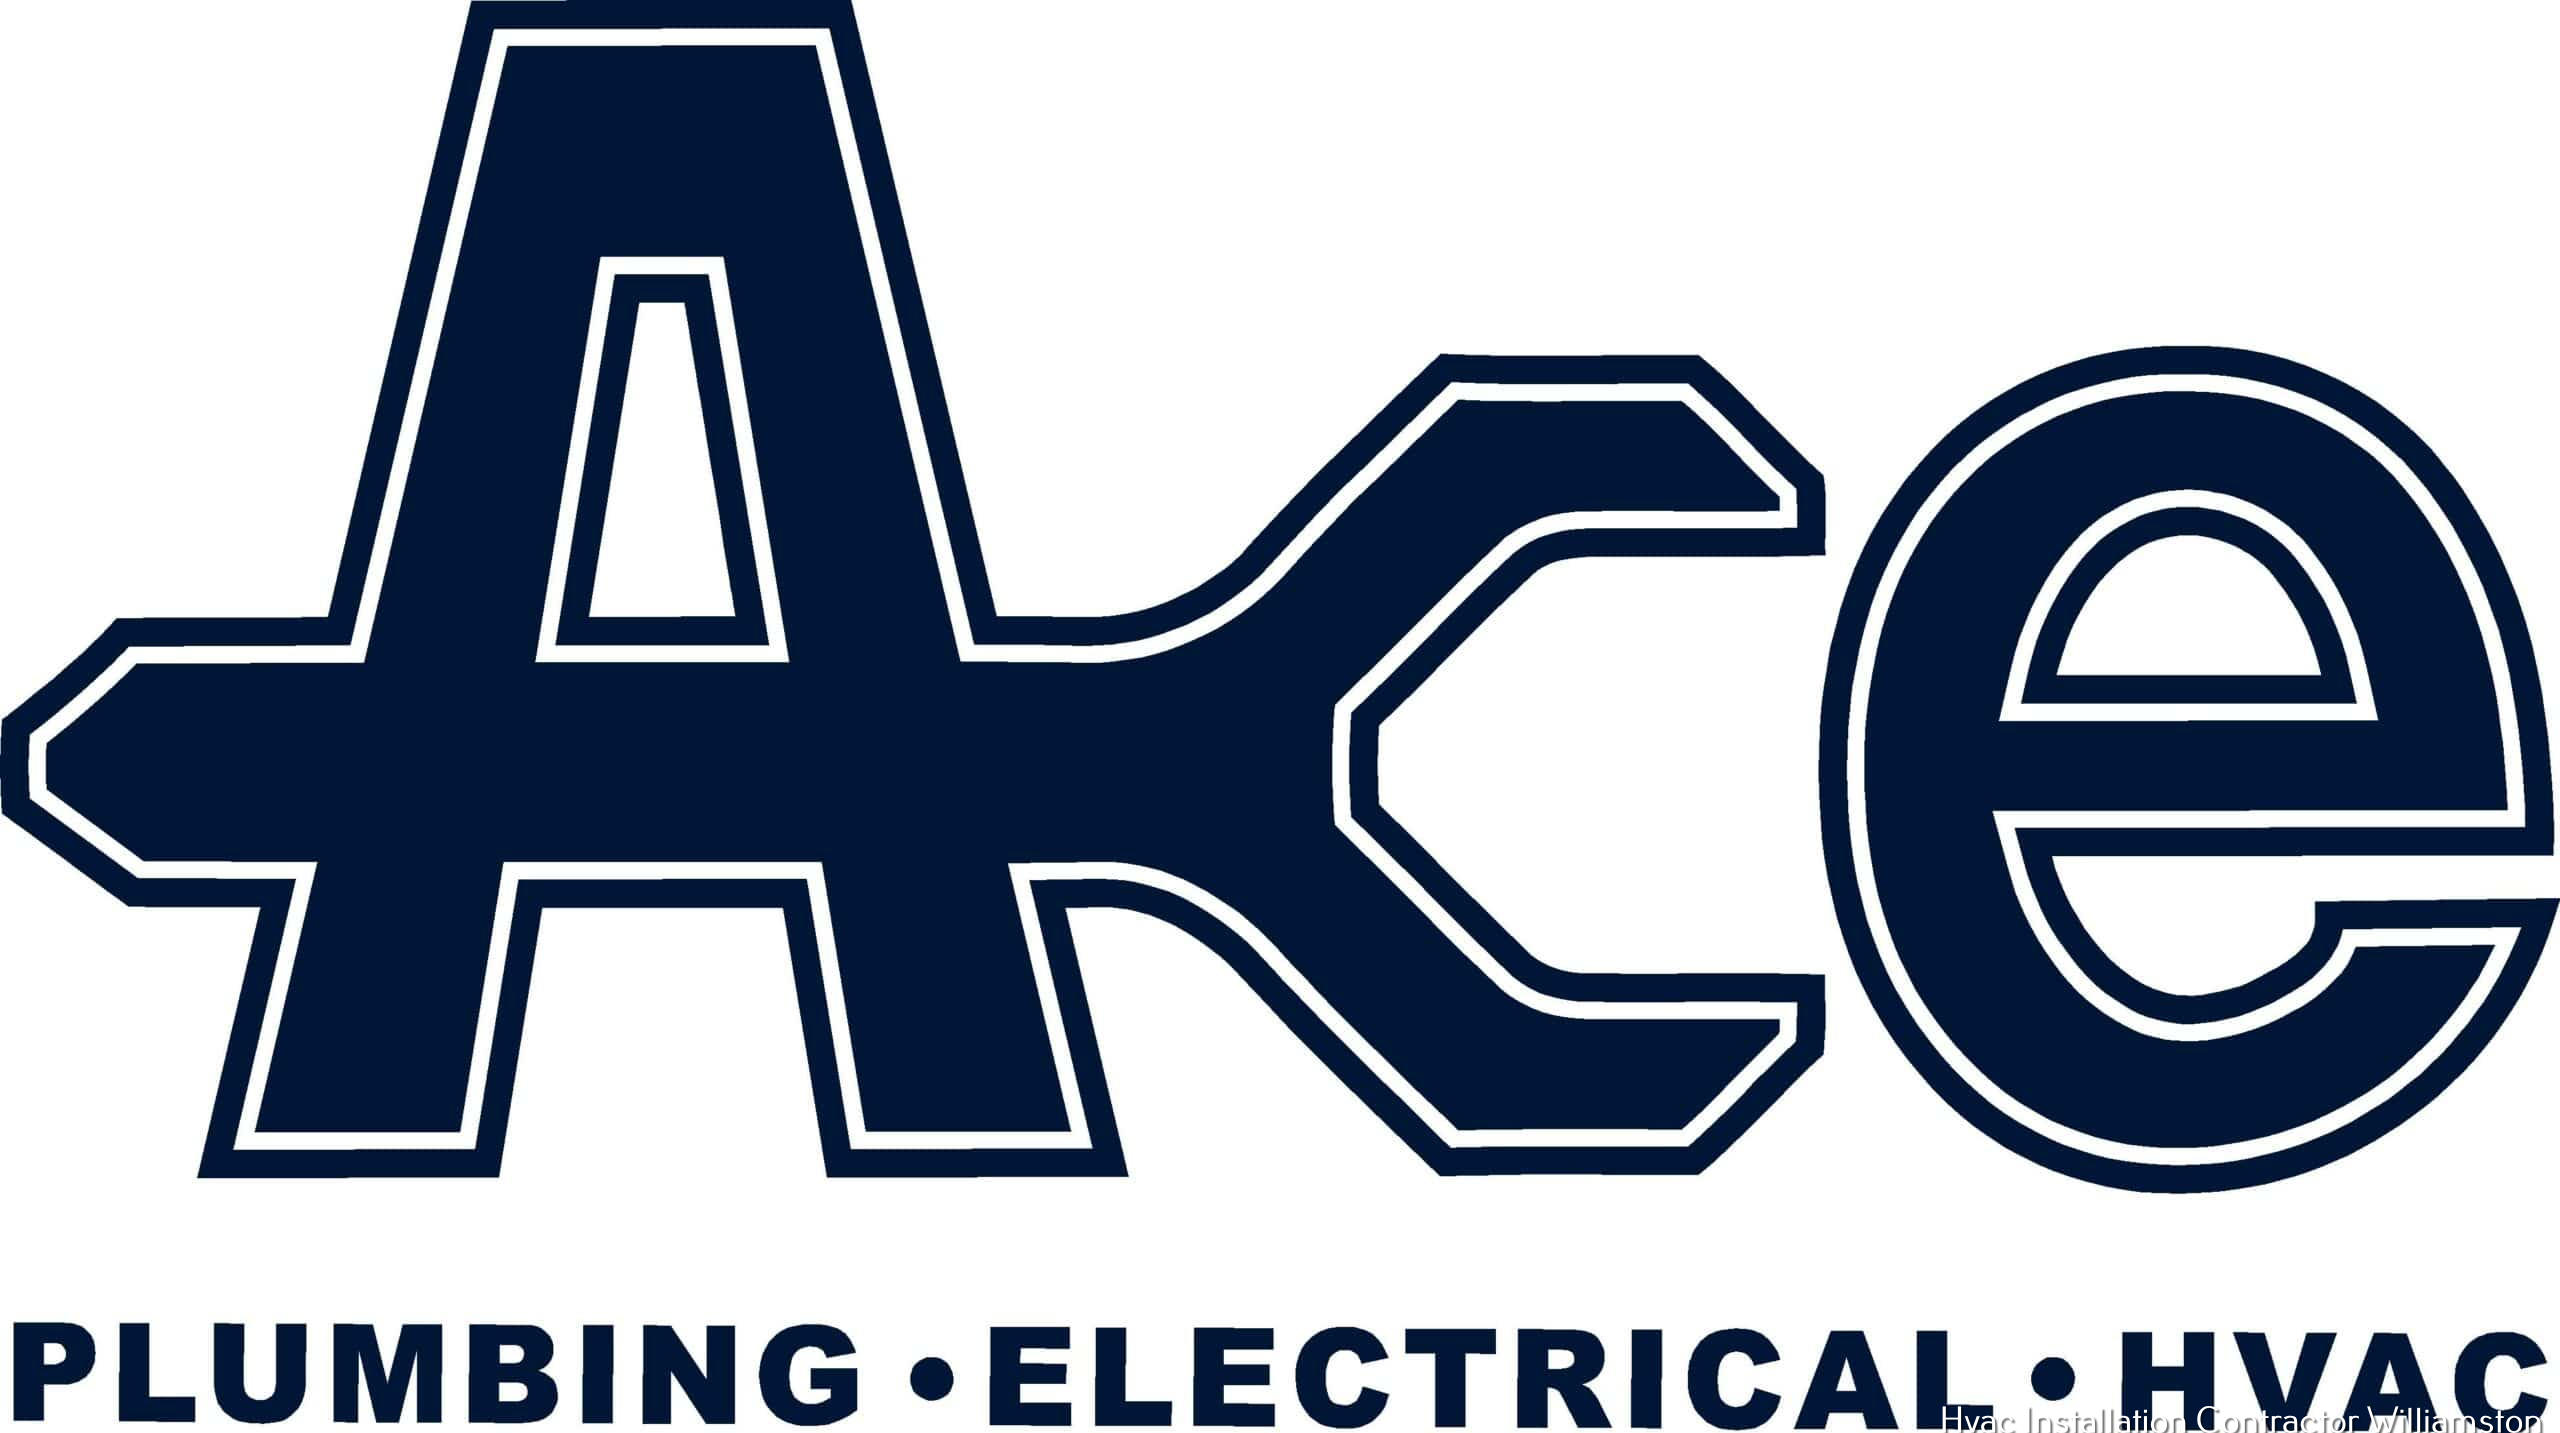 Ace Plumbing, Electric, Heating & Air Shares Why Customers Choose Them